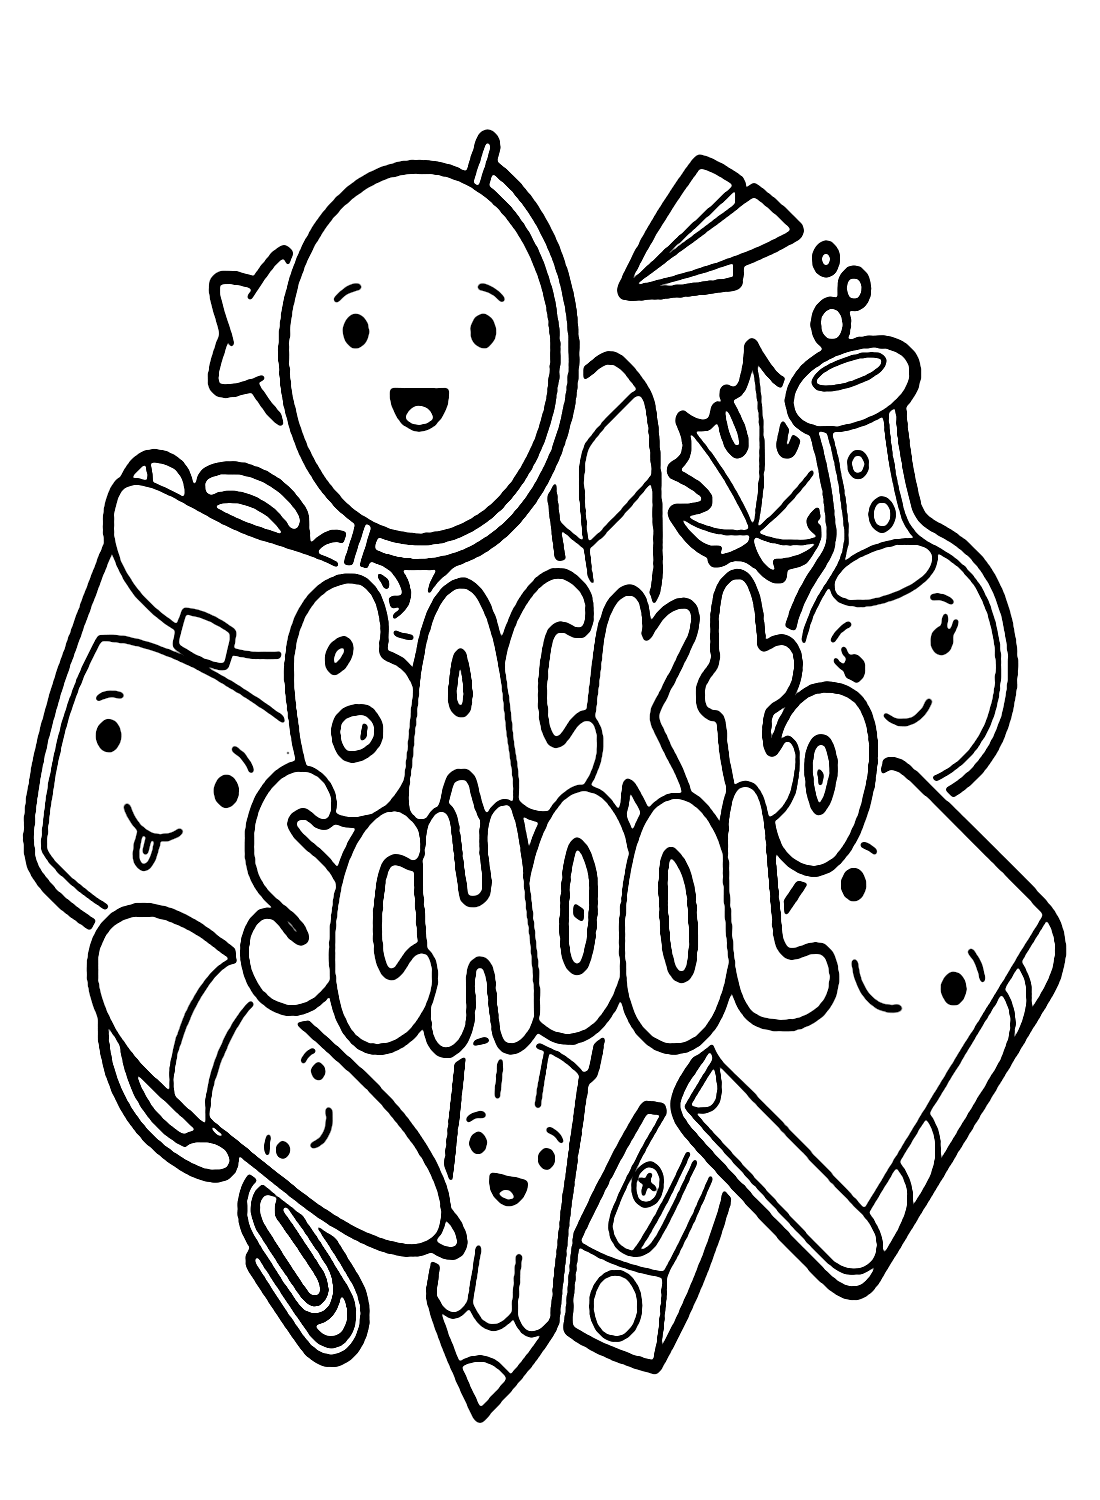 Back to School Image to Color